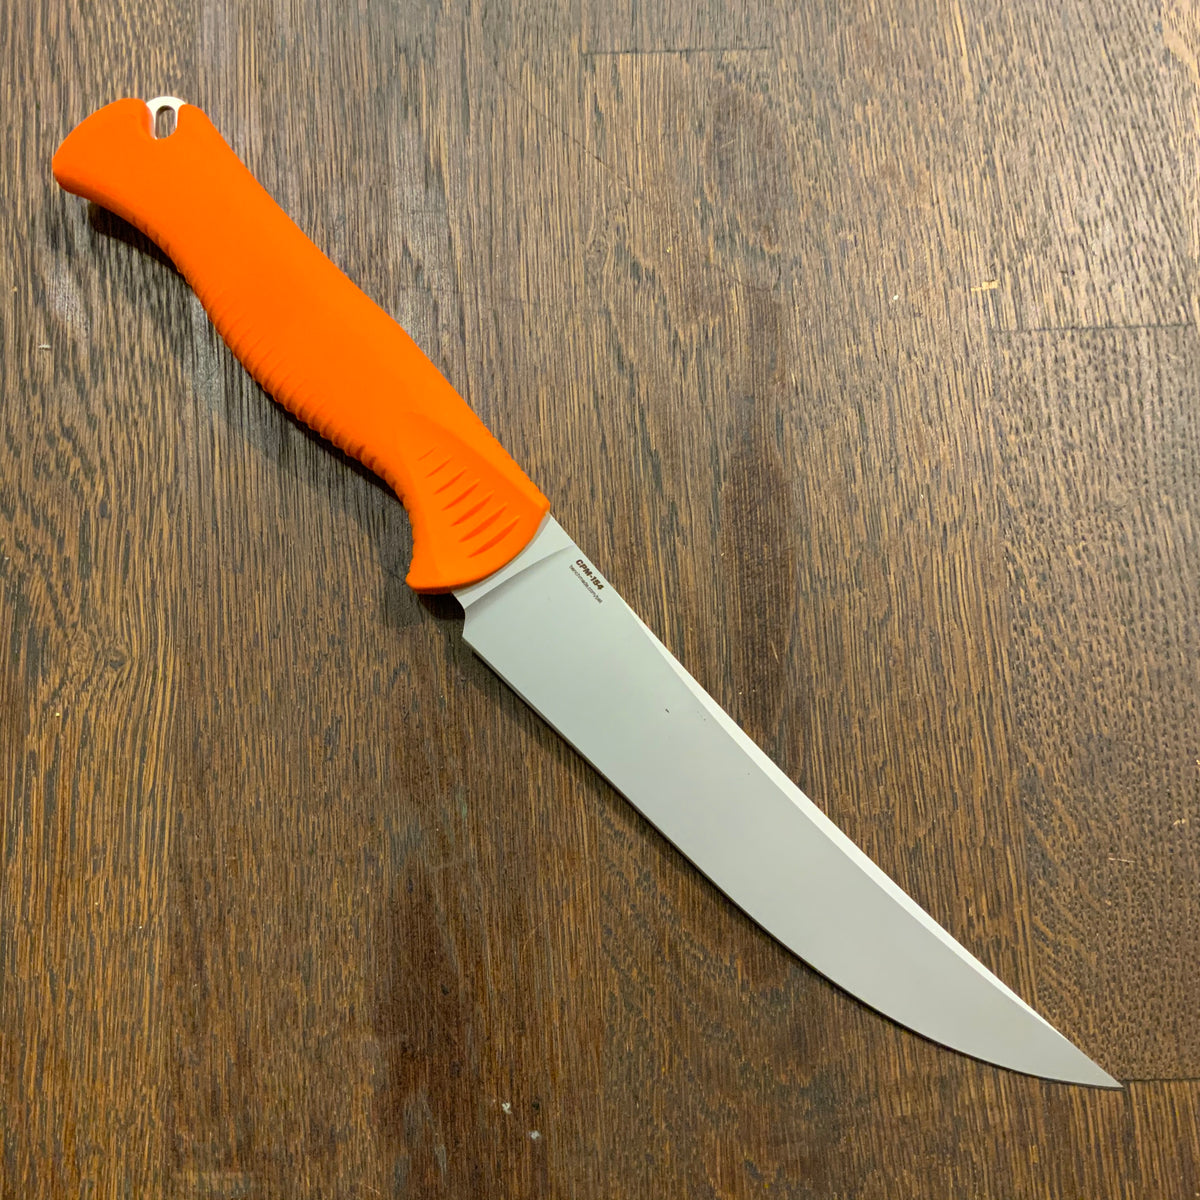 Benchmade 15500 Meatcrafter 6" Trailing Point CPM-154 Fixed Blade Orange Santoprene Handle with Sheath